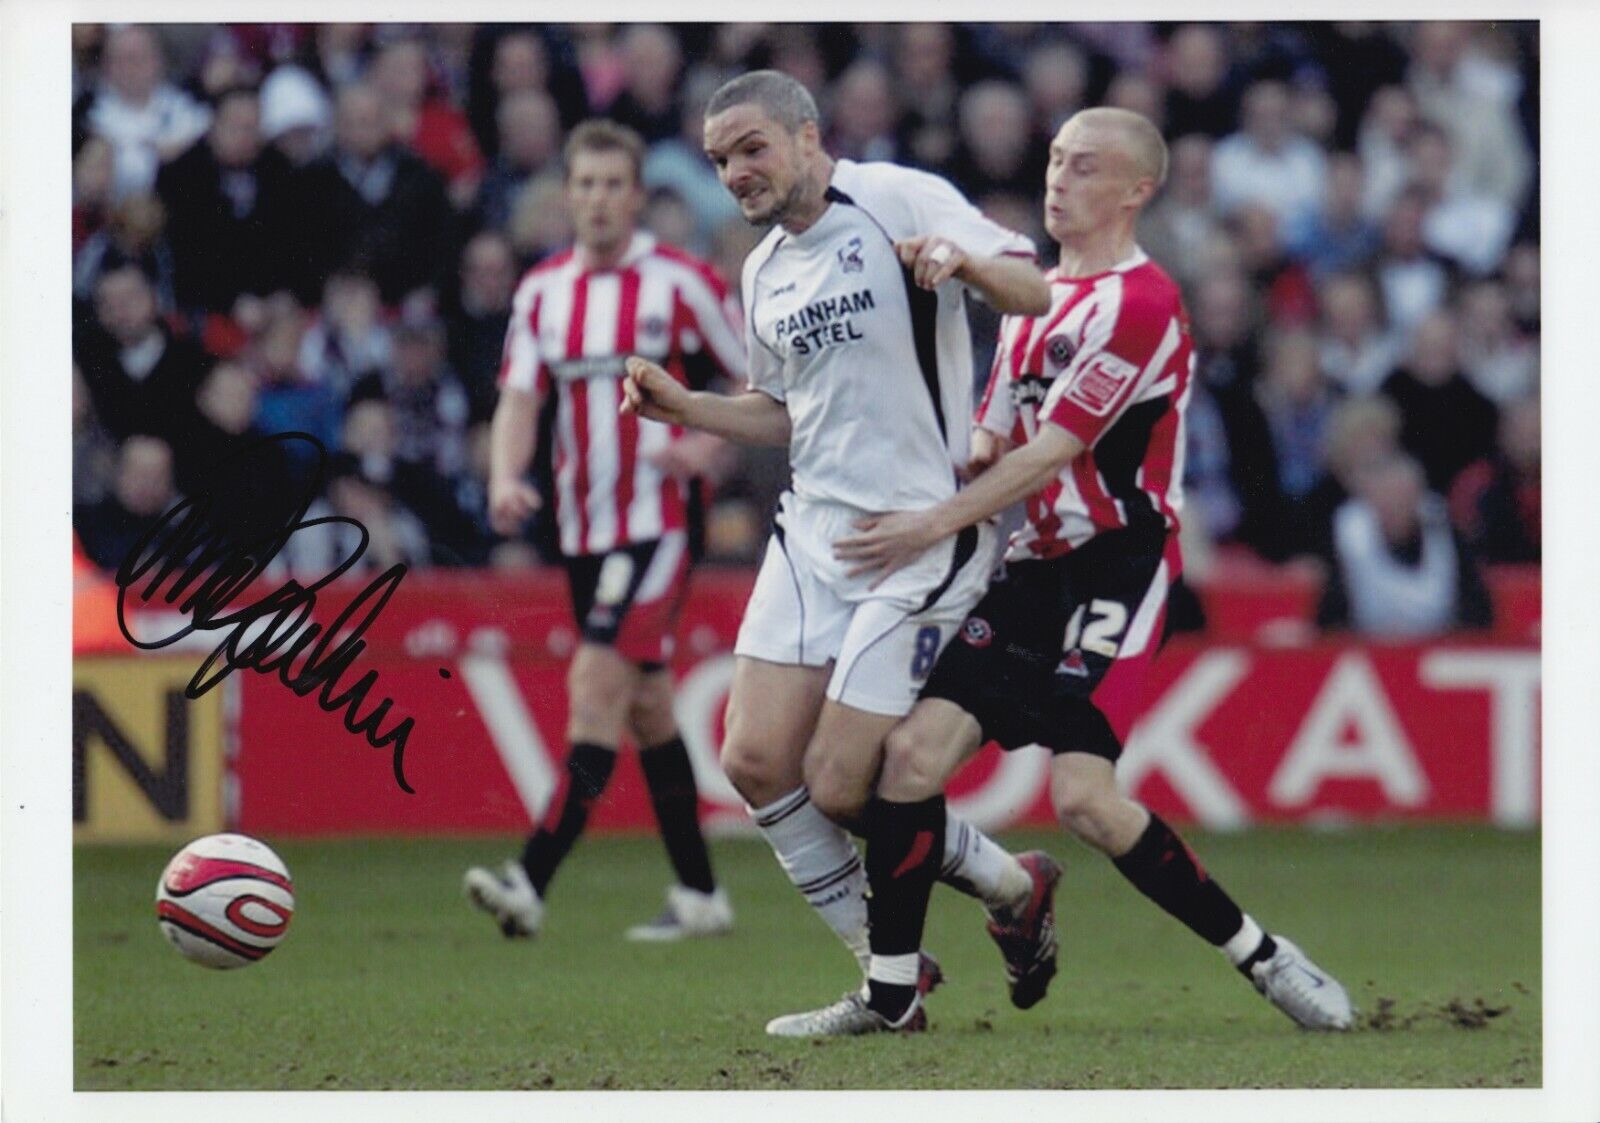 Jim Goodwin Hand Signed 12x8 Photo Poster painting - Scunthorpe United Autograph.